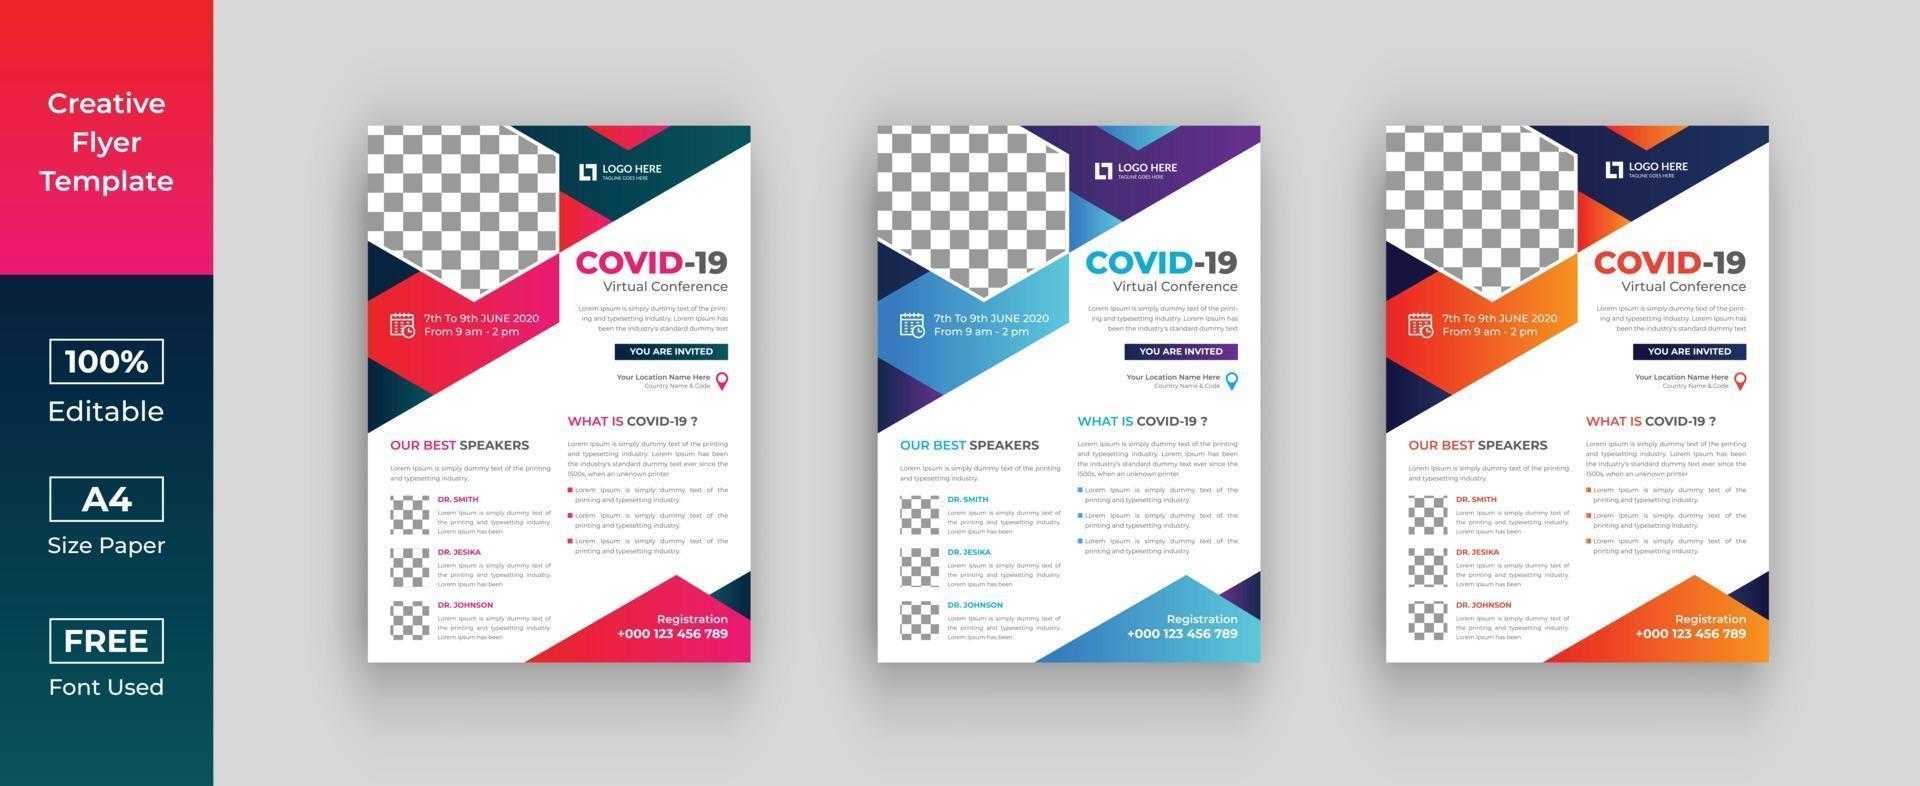 Covid-19 conference flyer template, Covid-19 flyer or poster vector